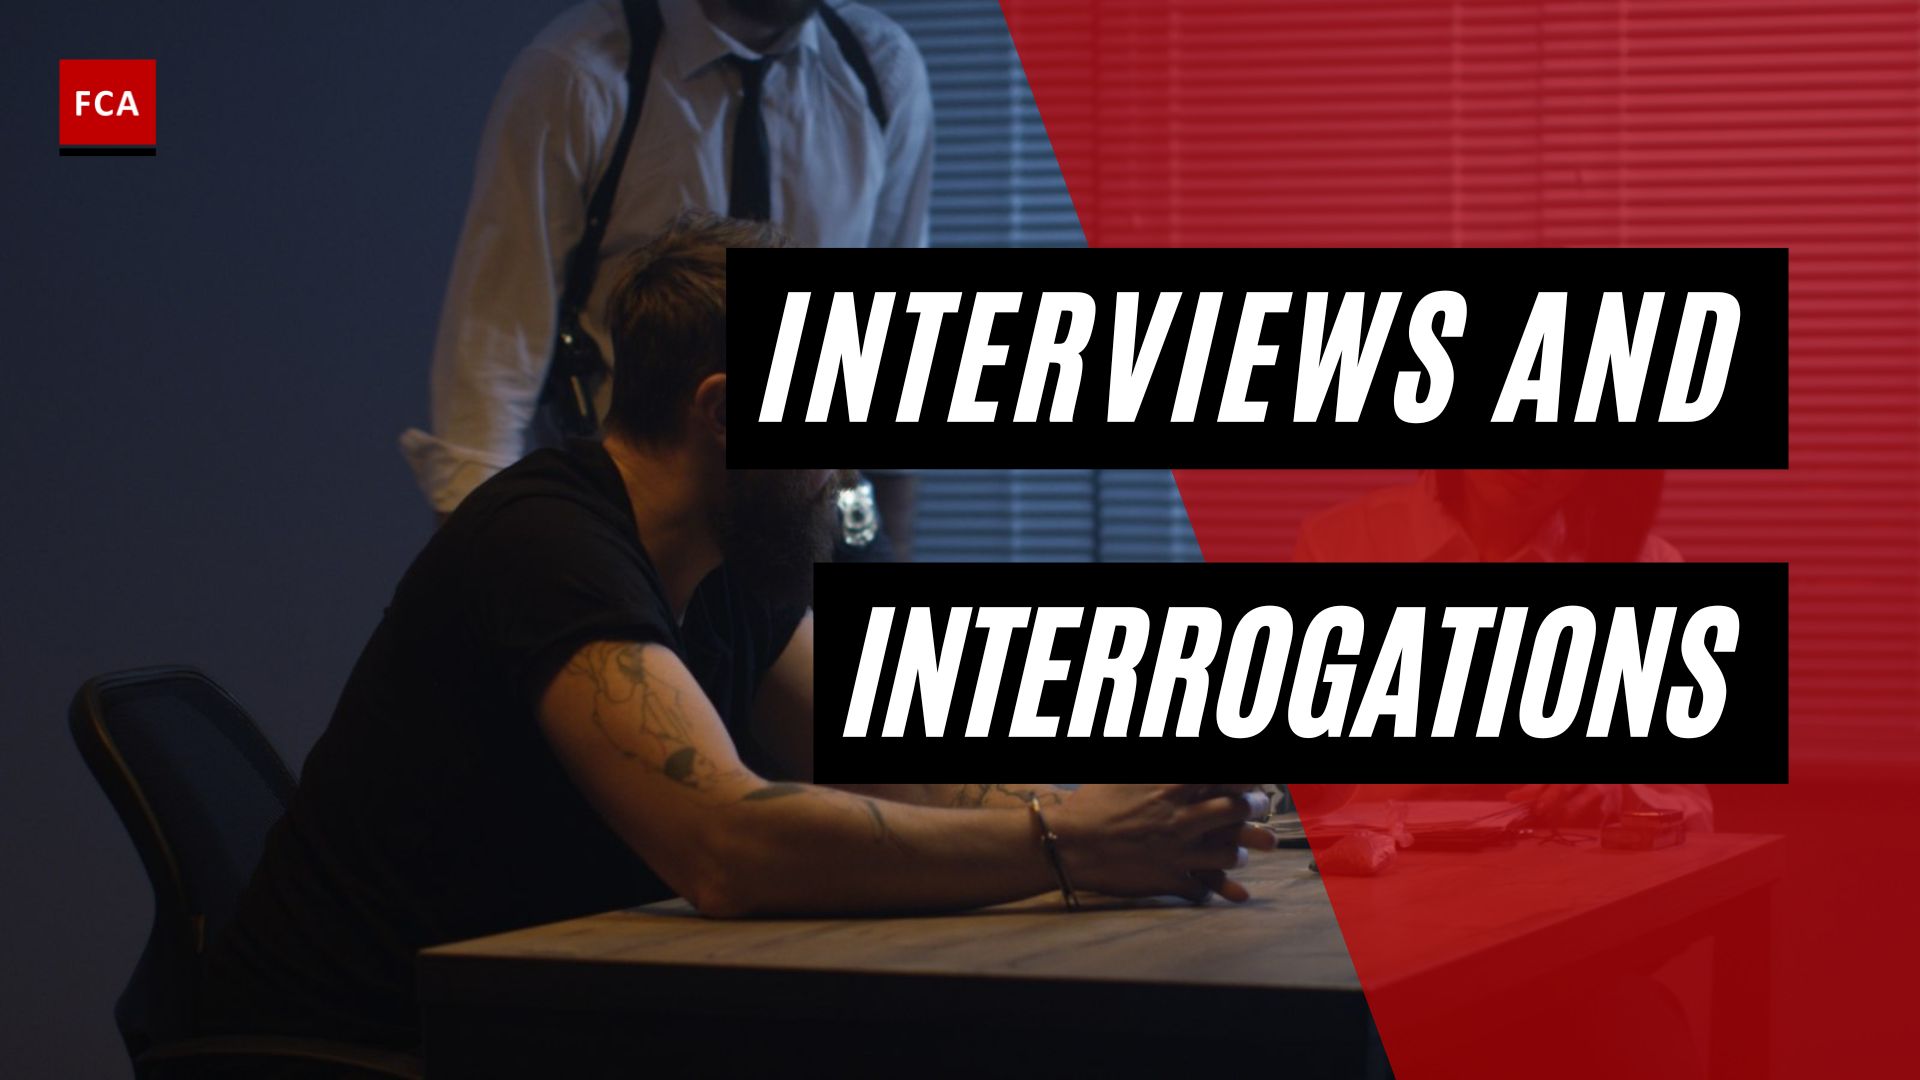 Interviews And Interrogations